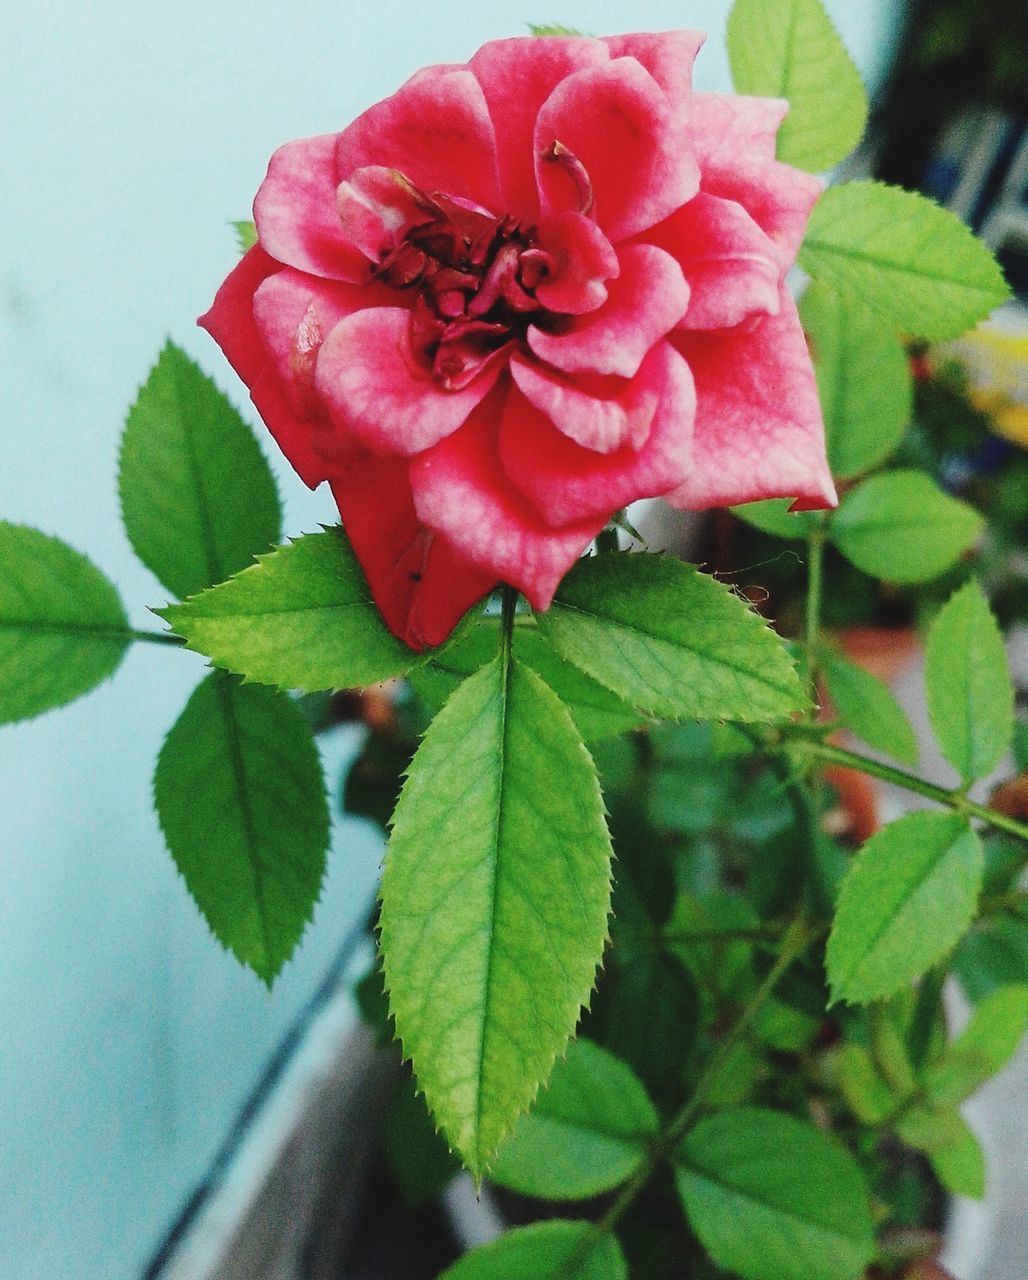 leaf, flower, freshness, growth, fragility, petal, beauty in nature, red, close-up, flower head, plant, nature, green color, rose - flower, single flower, blooming, pink color, focus on foreground, botany, no people